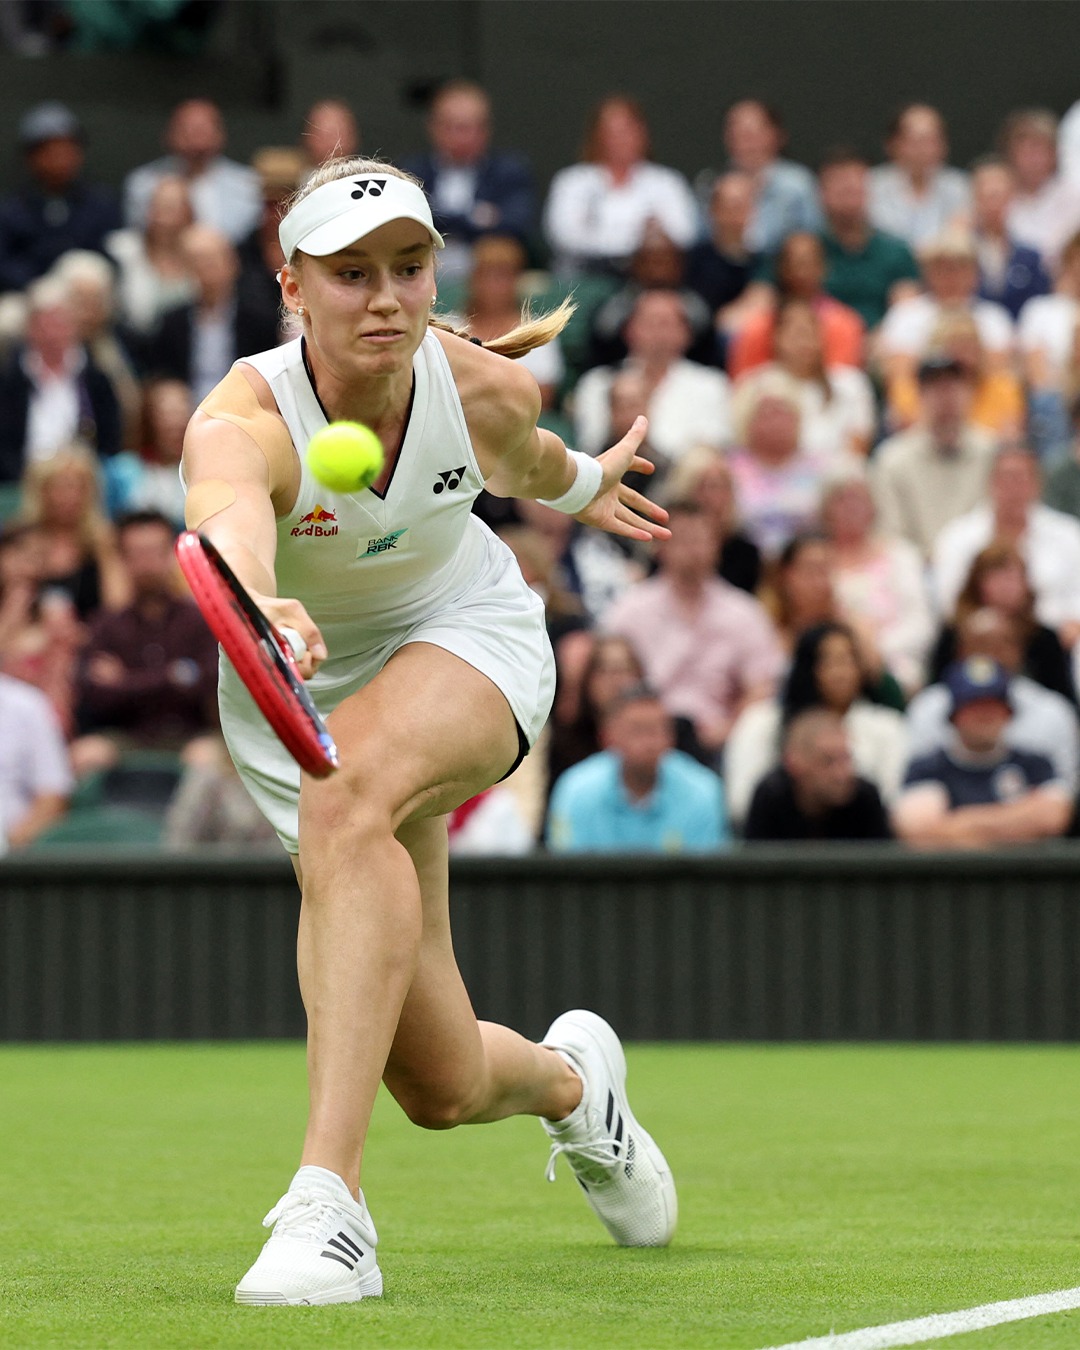 Wimbledon finally changes all-white rule for women - Yahoo Sports